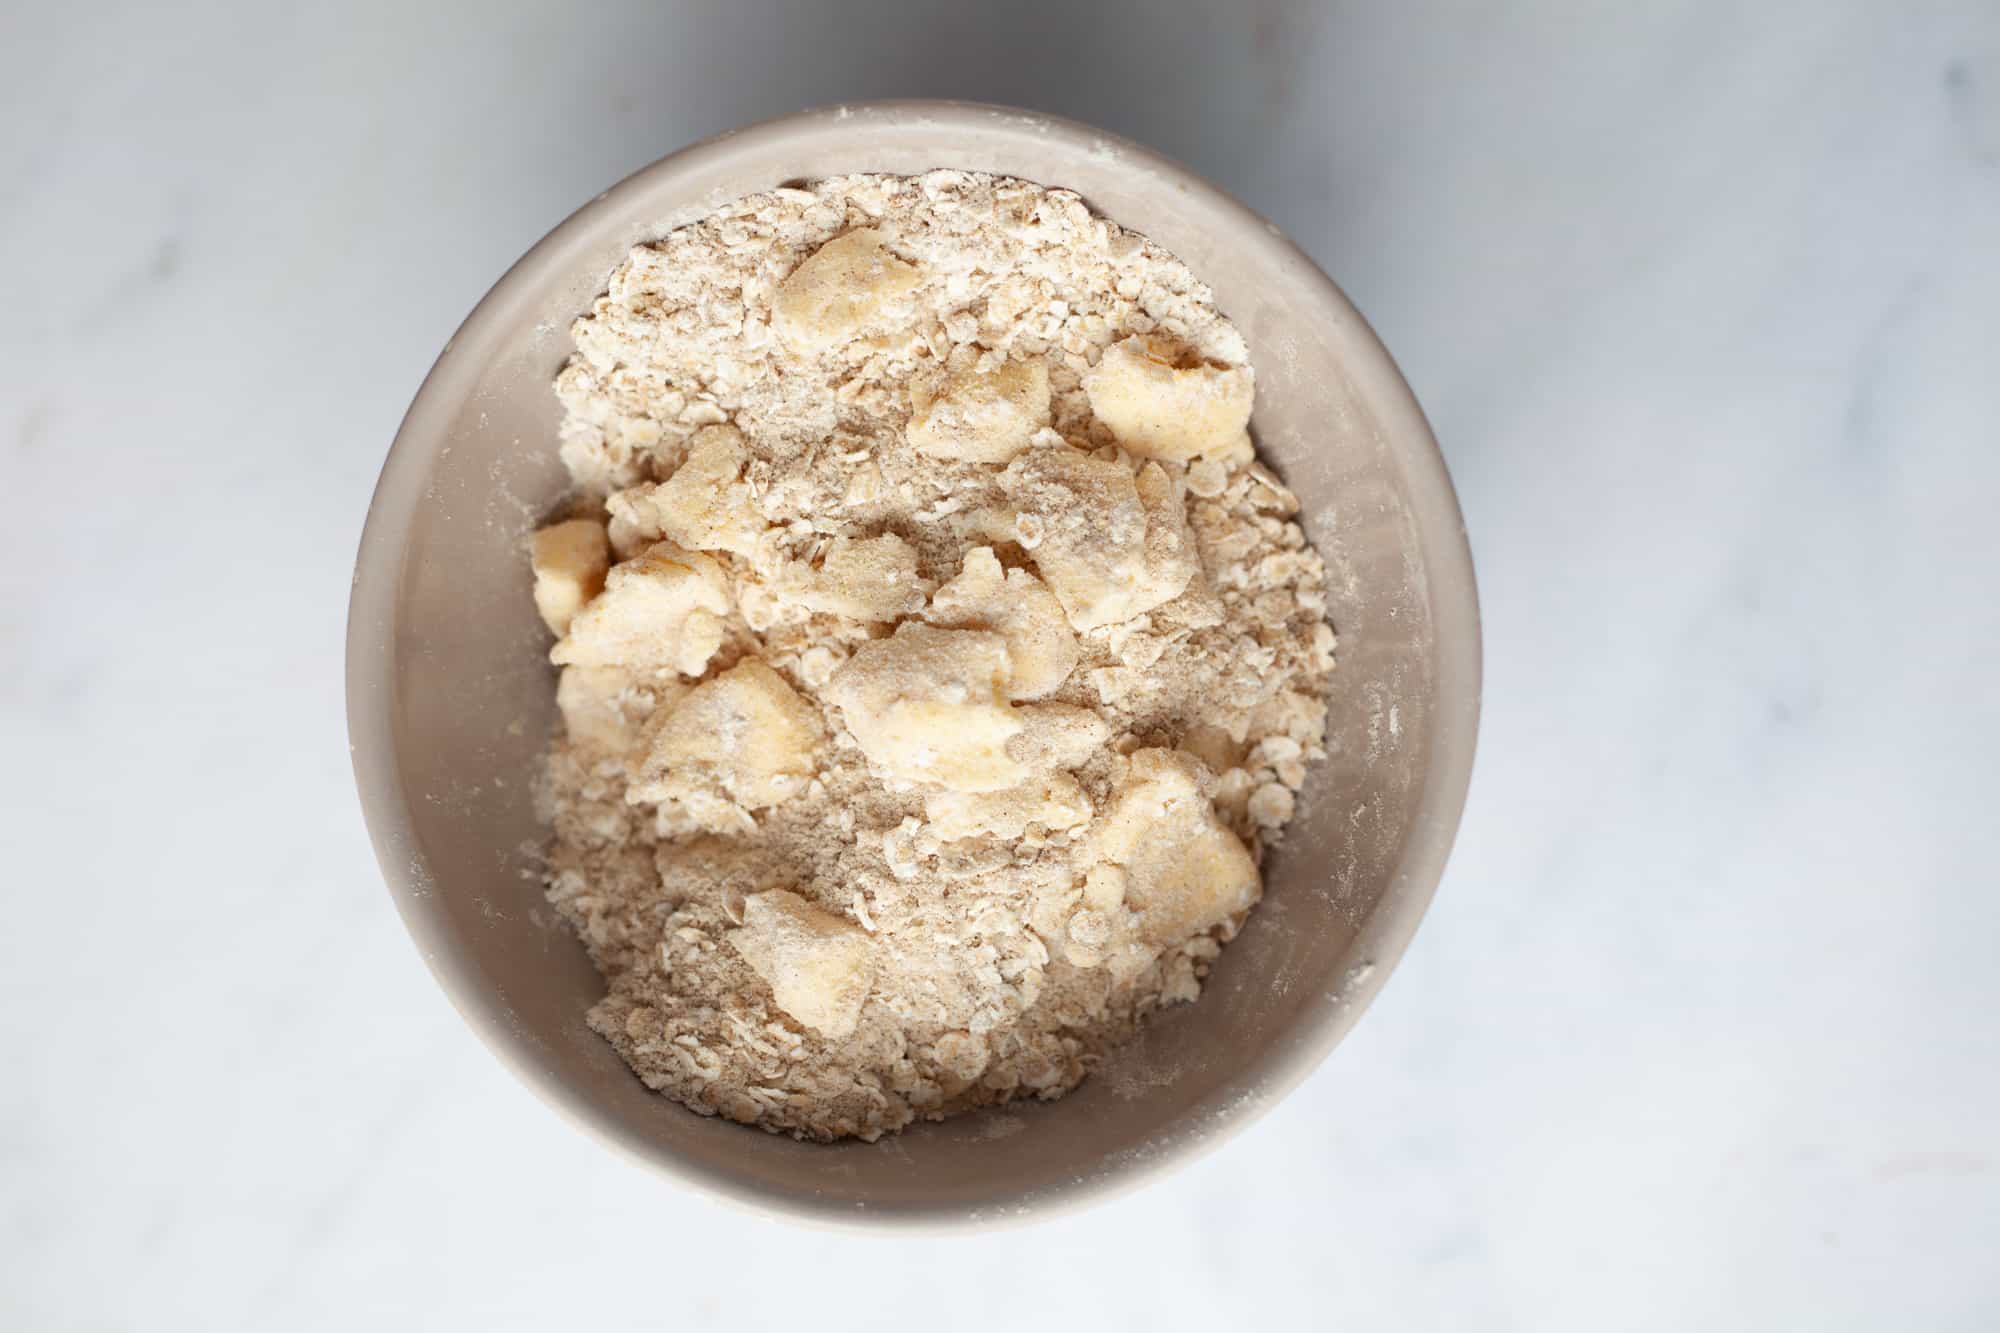 A small beige bowl with what looks like flour, oats, and small bits of butter